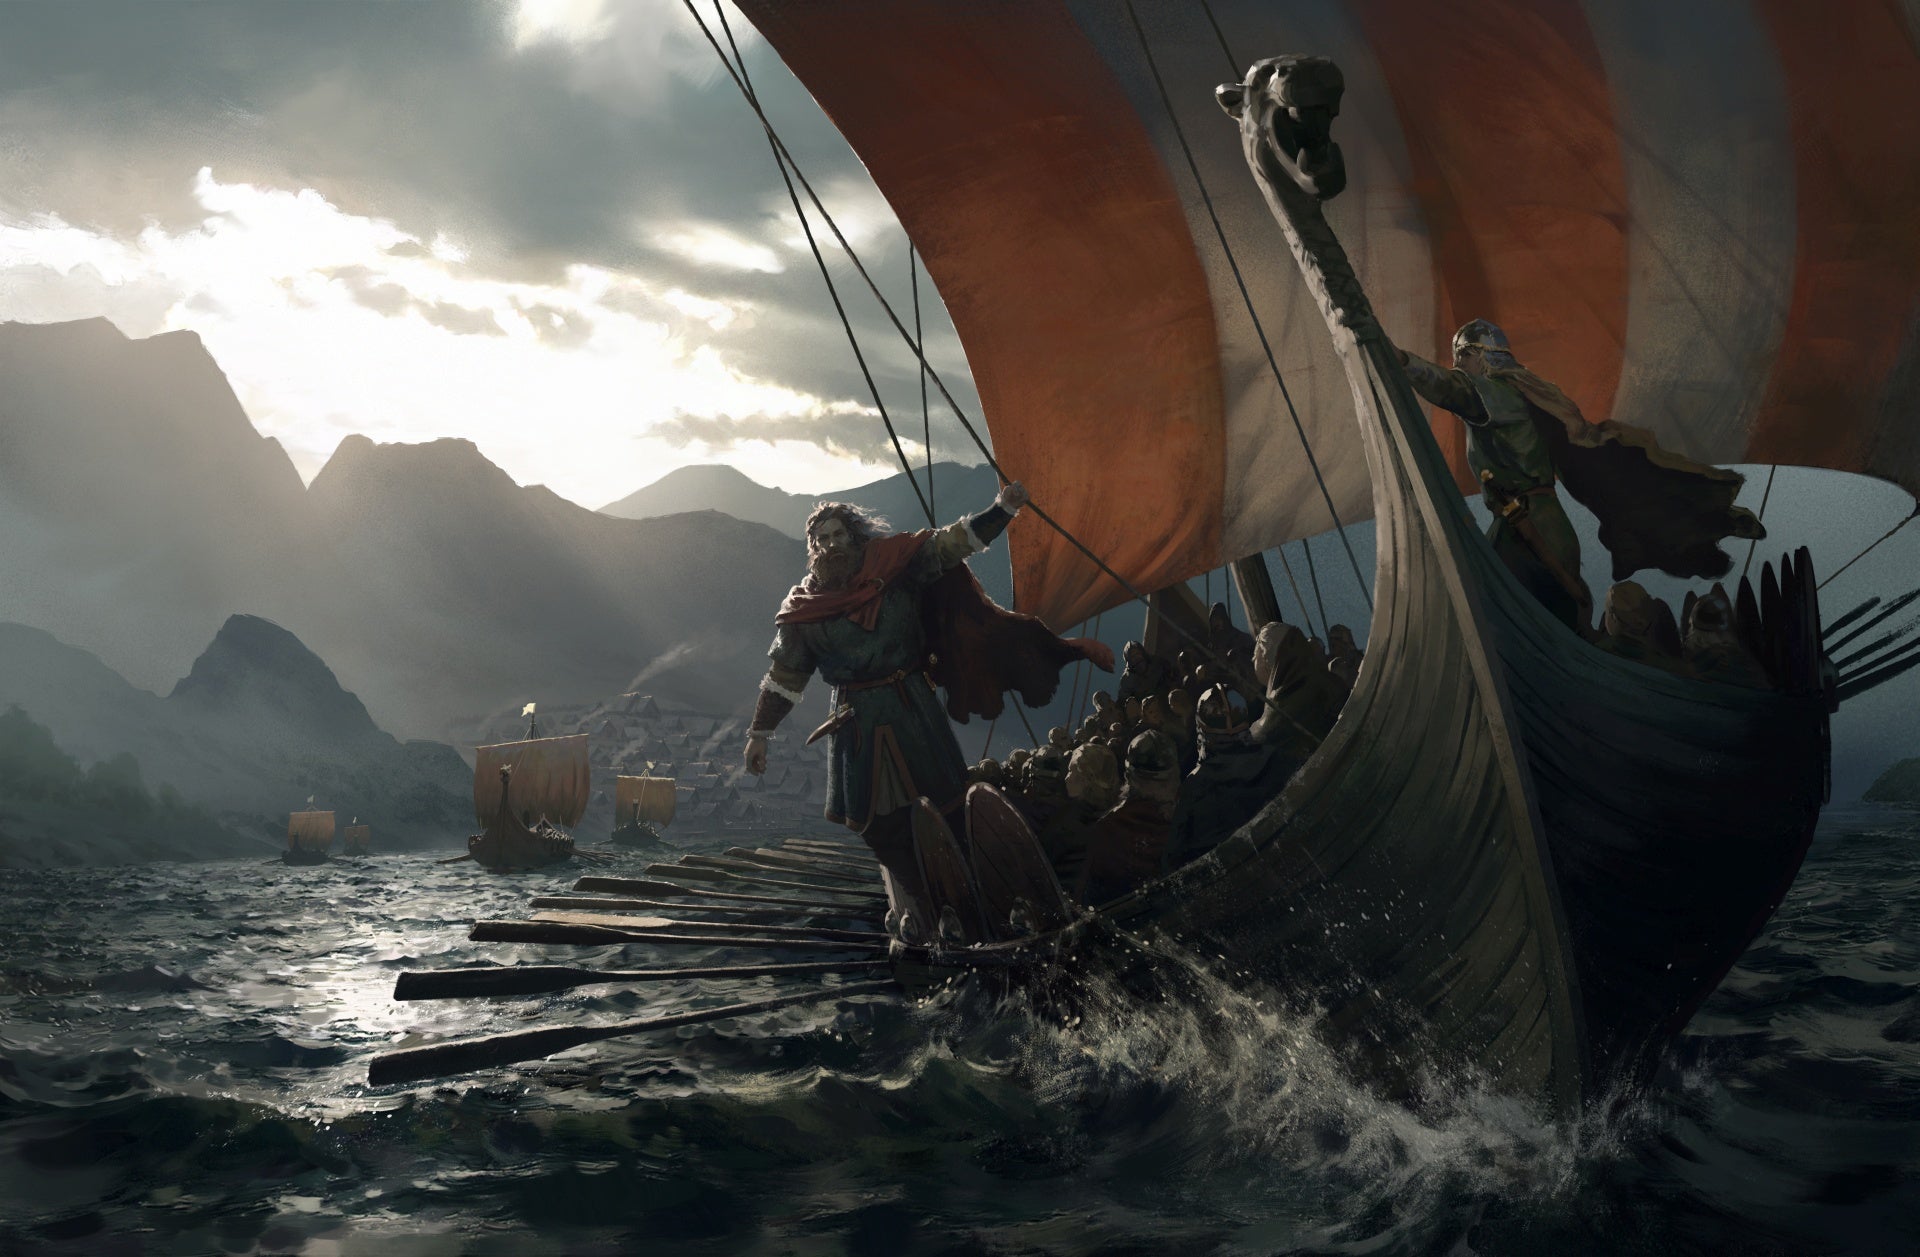 Key art for Crusader Kings 3's Northern Lords expansion, showing a viking longship at sea, oars in the water, and a lordy looking fellow hanging off the side of the ship and facing towards the viewer.